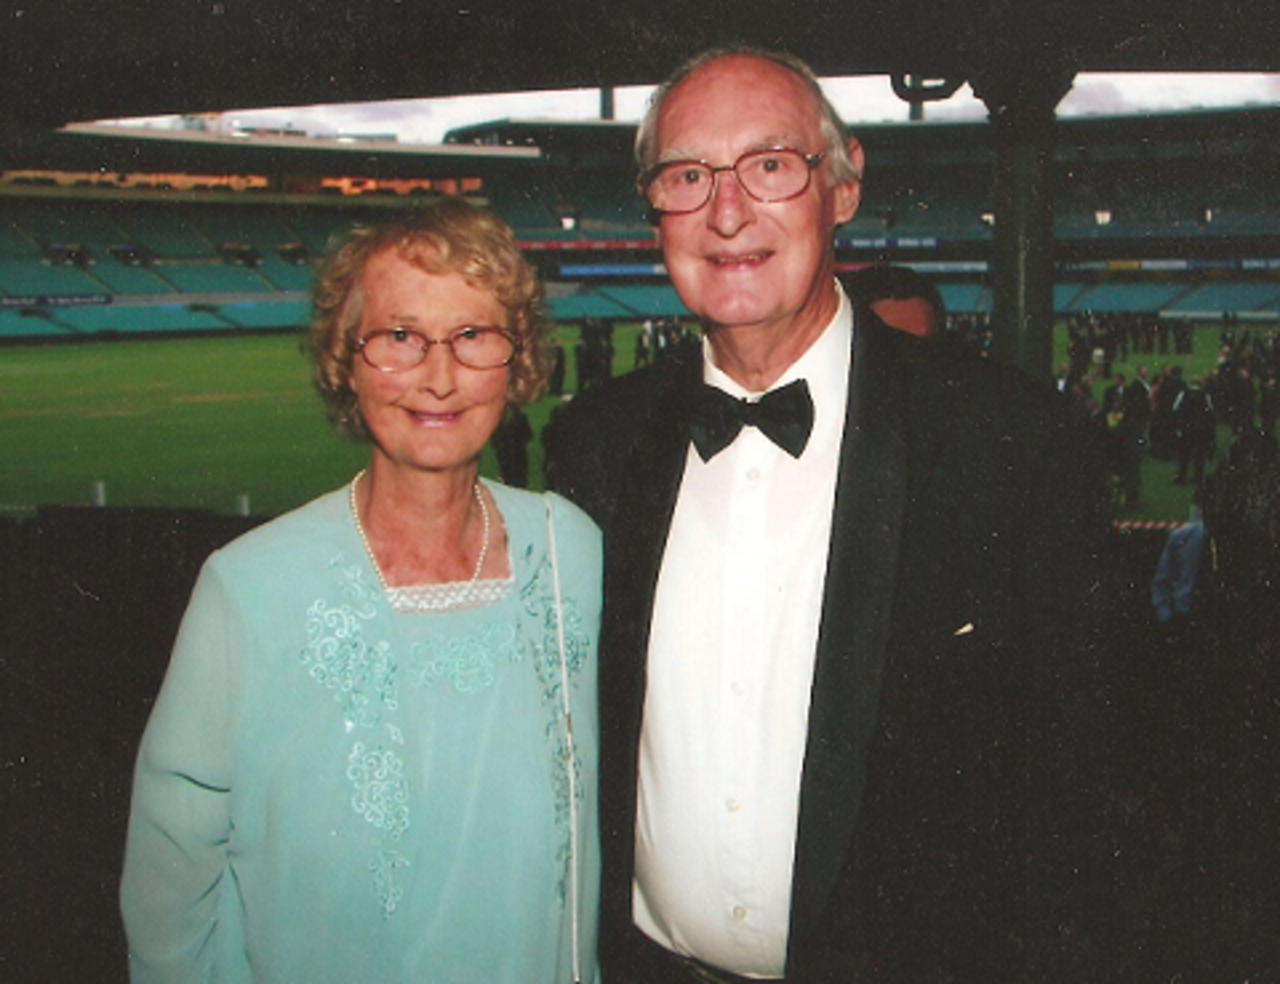 Brian and Judy Booth at the SCG, Sydney, October, 2011